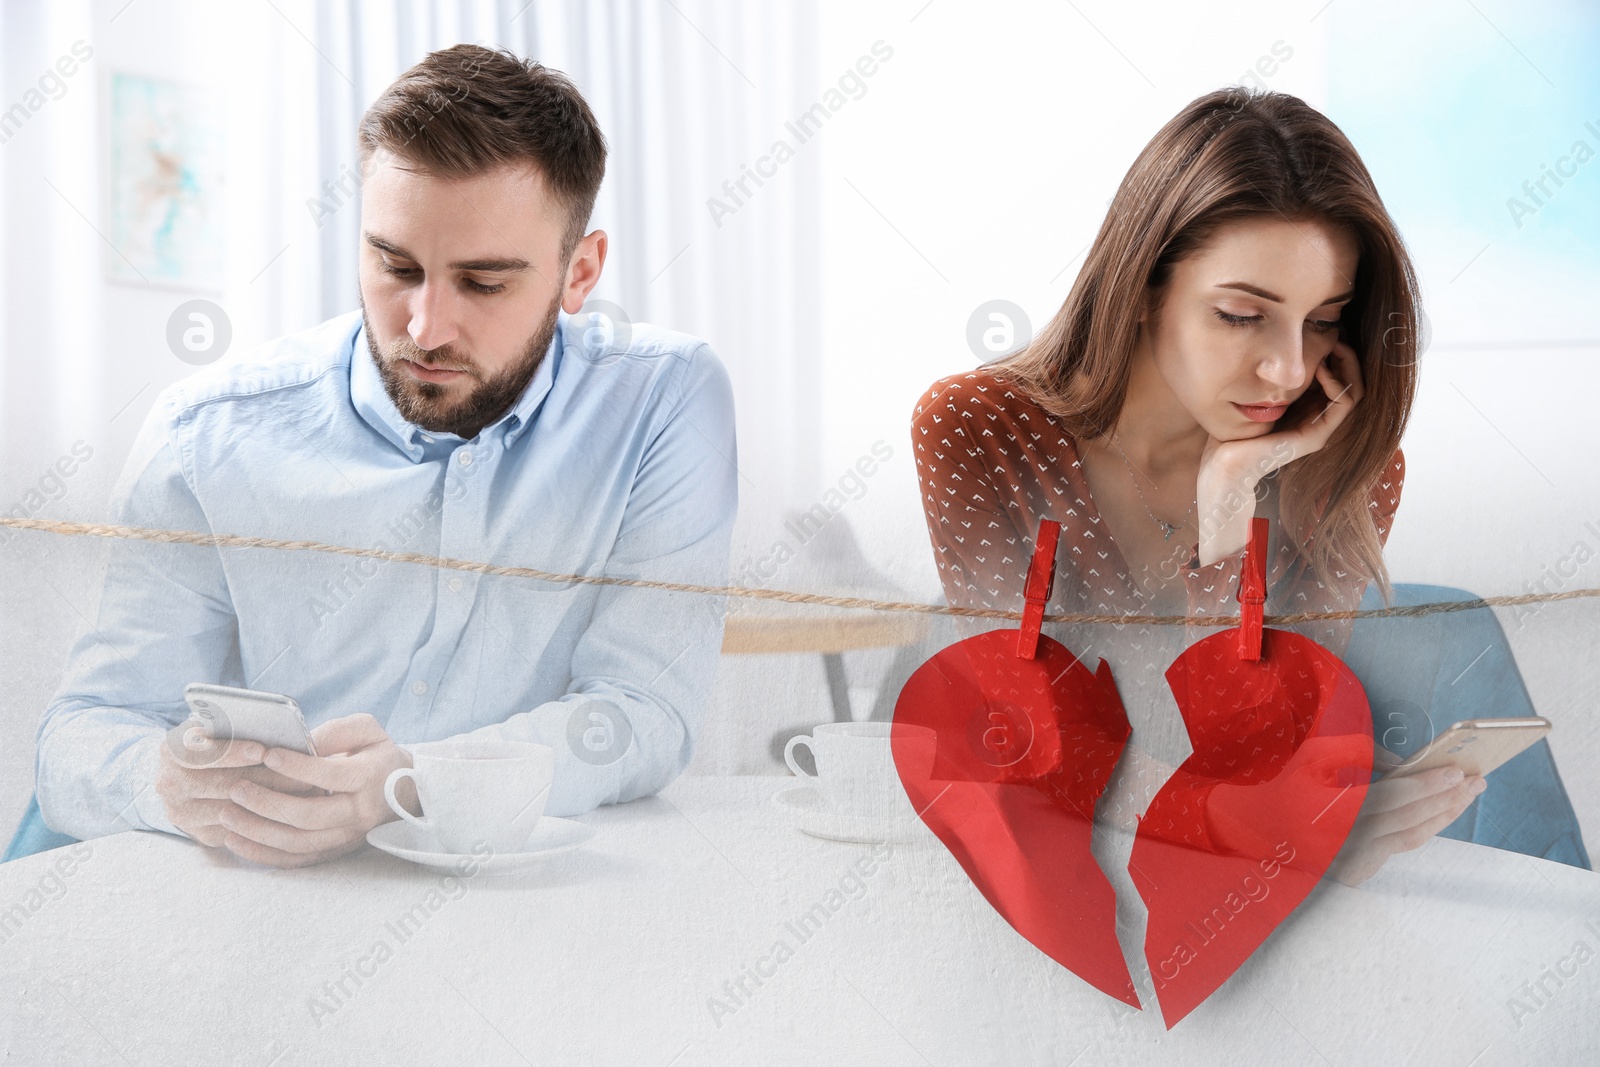 Image of Double exposure with couple addicted to smartphones ignoring each other and halves of torn paper heart pinned on laundry string. Relationship problems